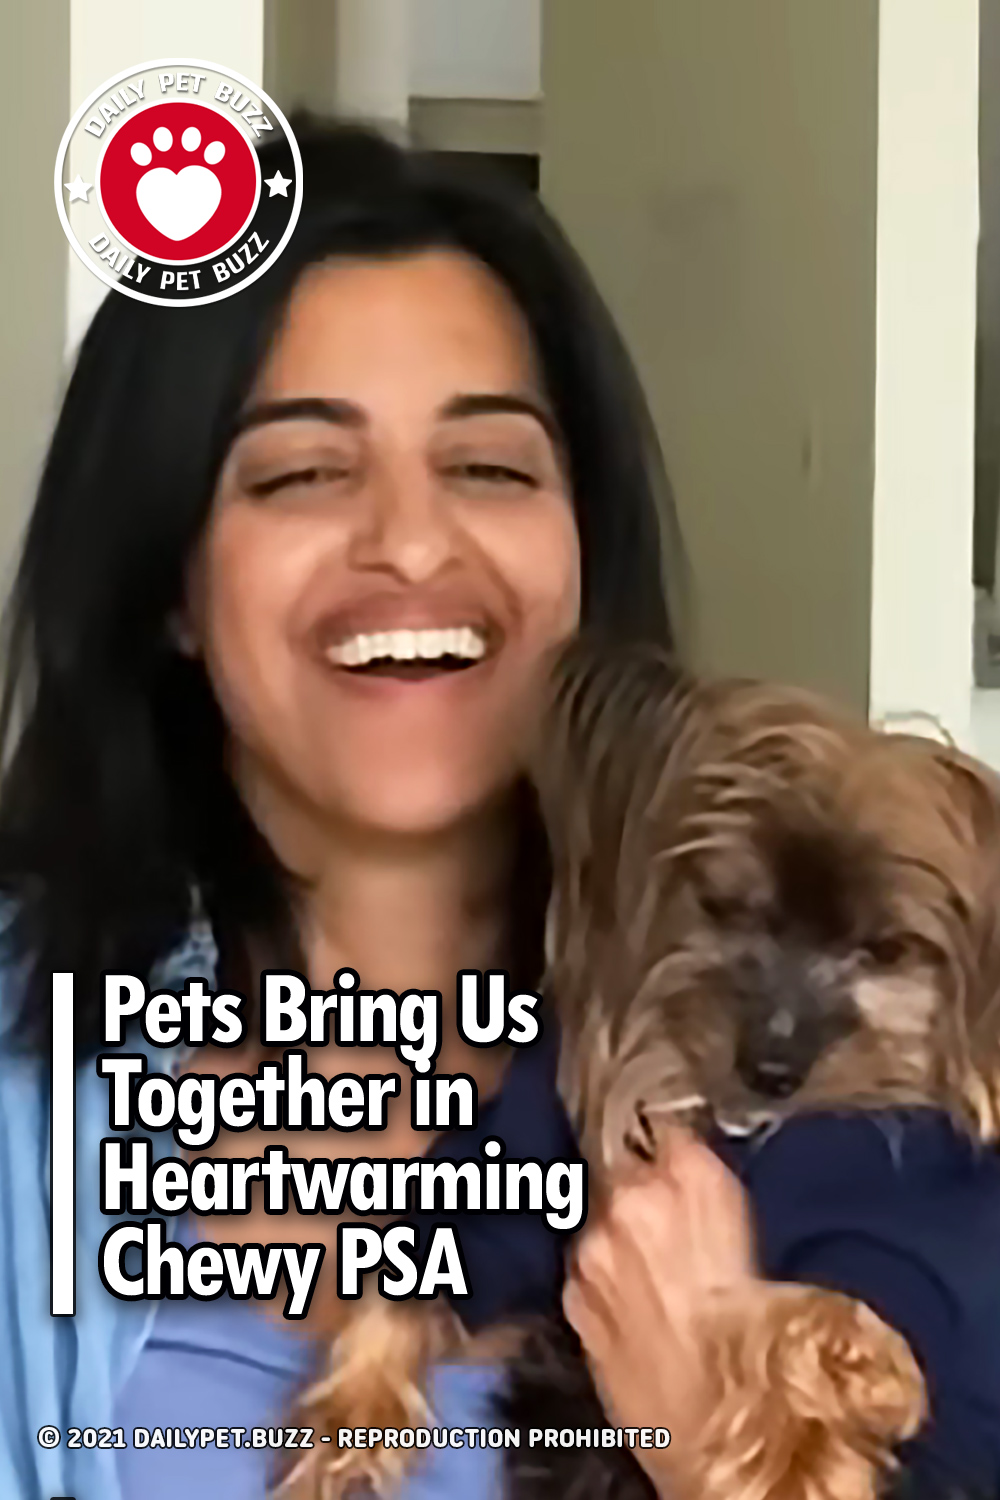 Pets Bring Us Together in Heartwarming Chewy PSA